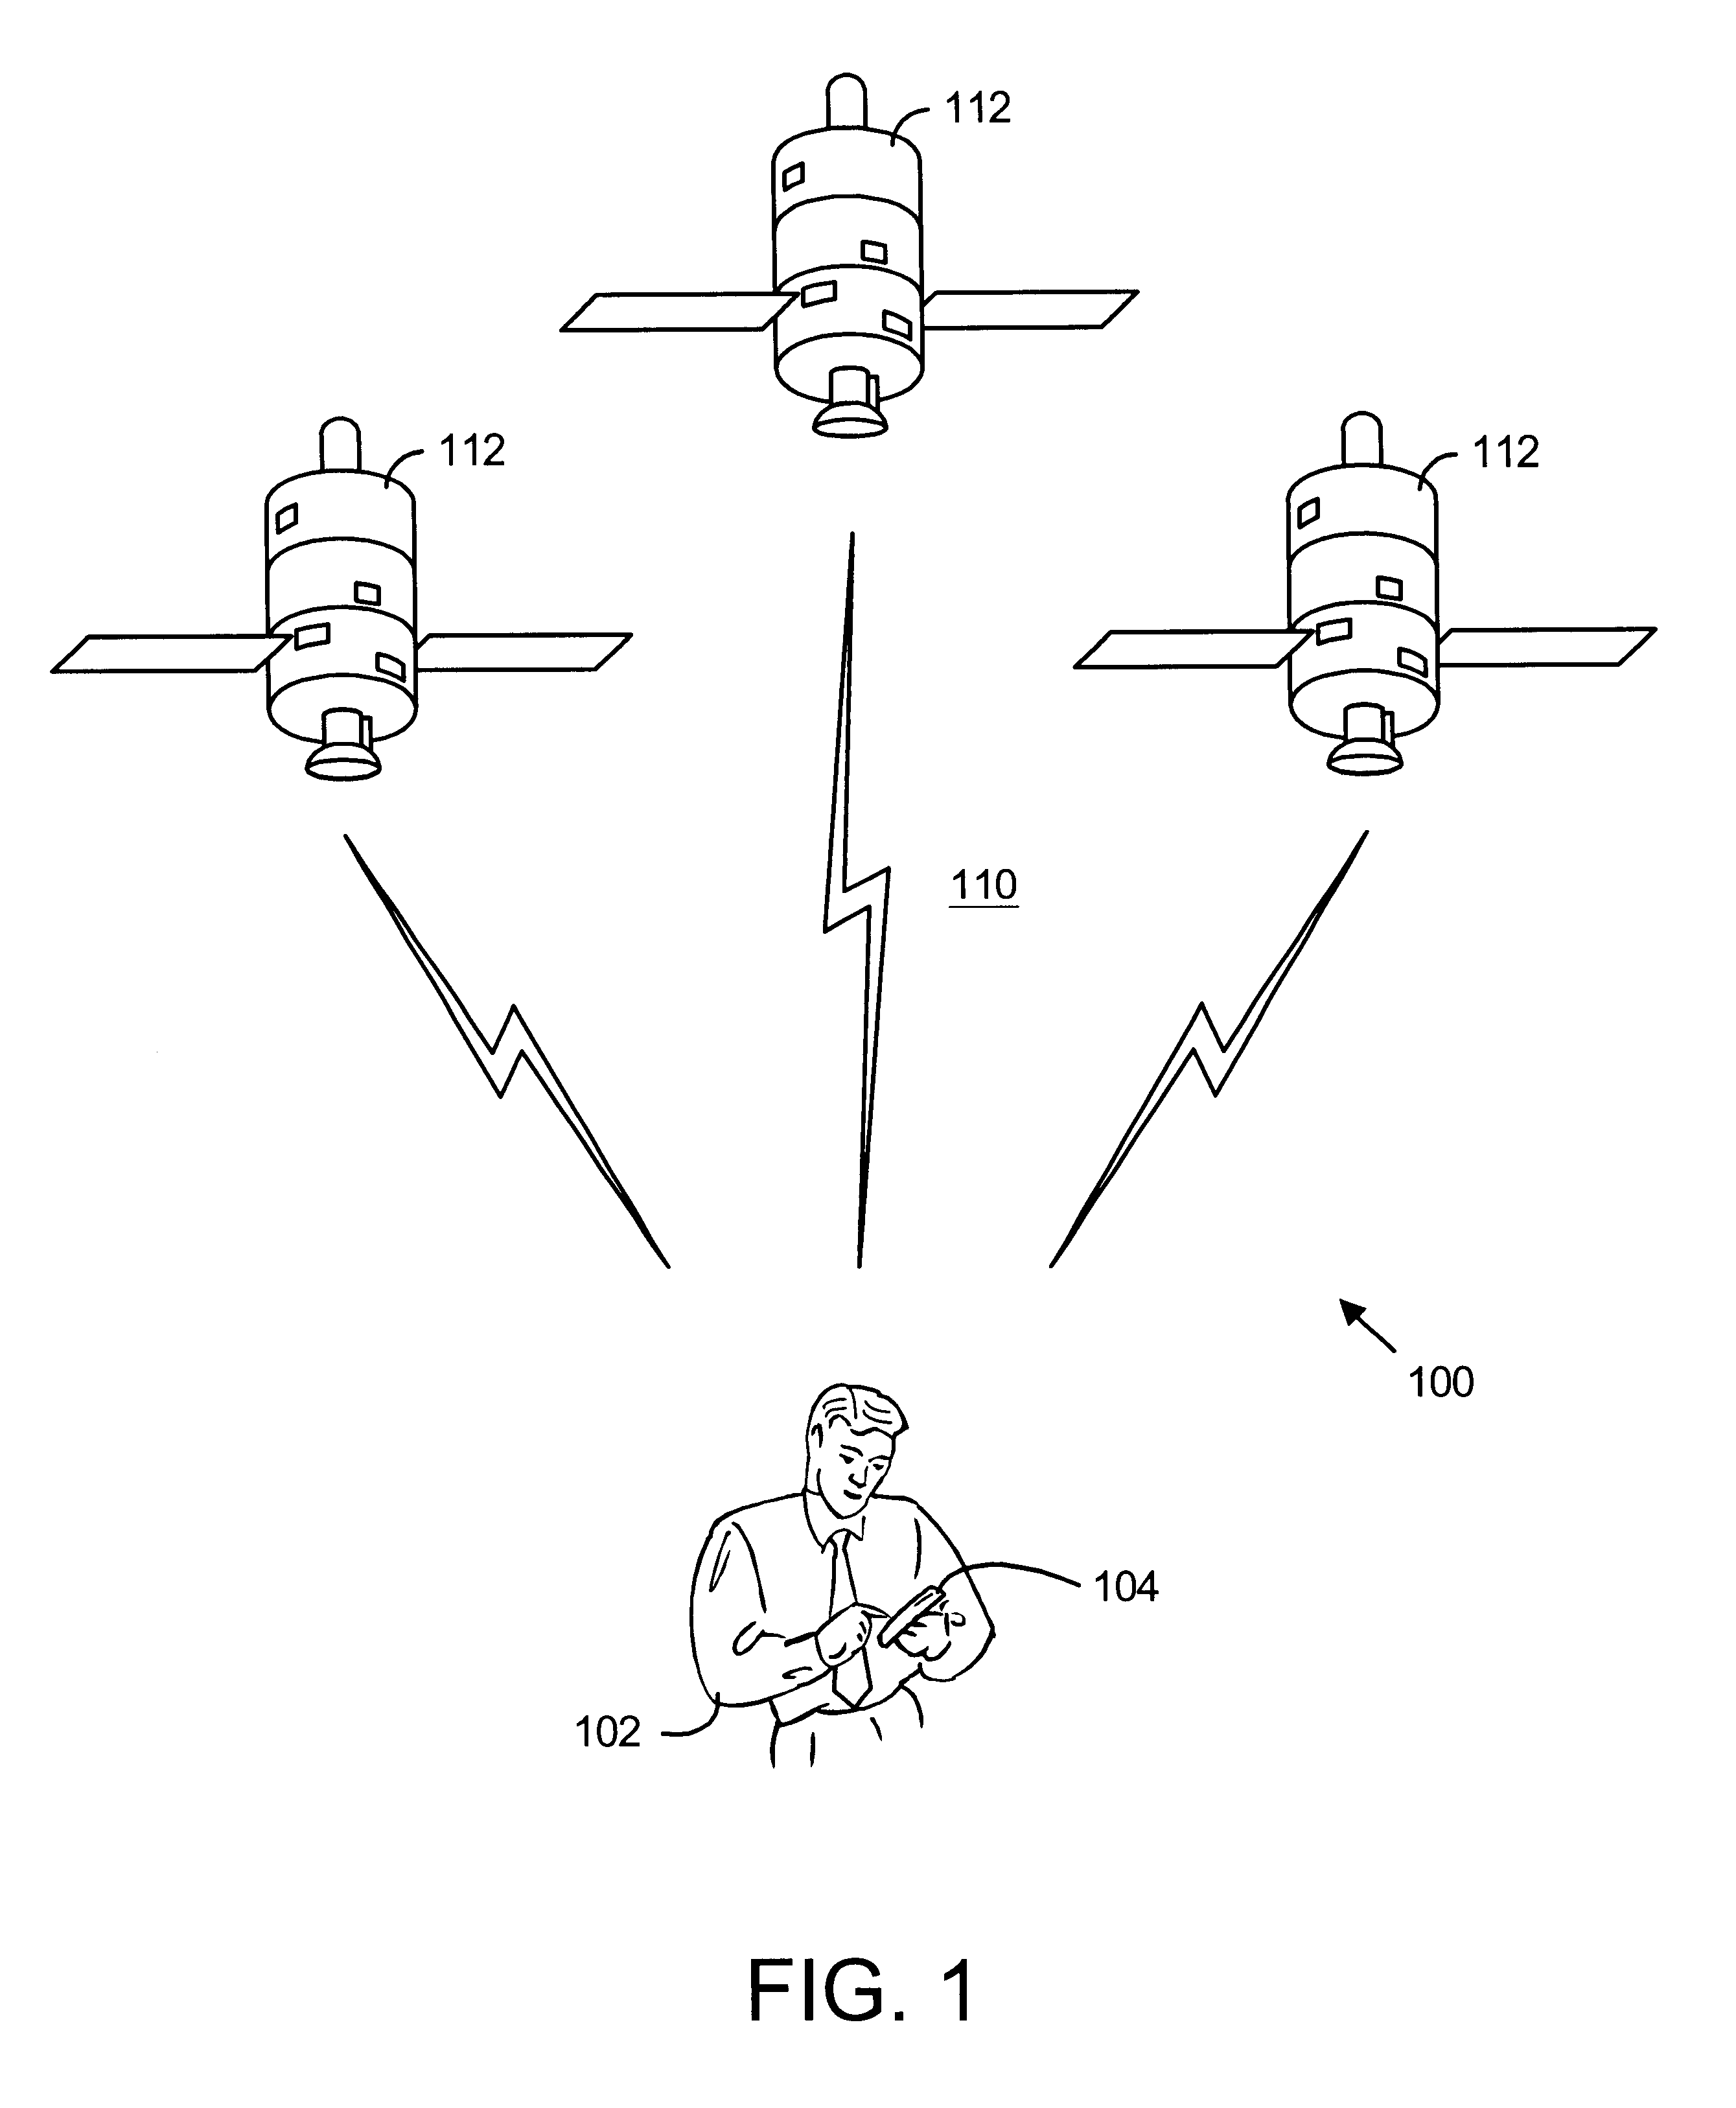 System and method for providing access to mobile devices based on positional data